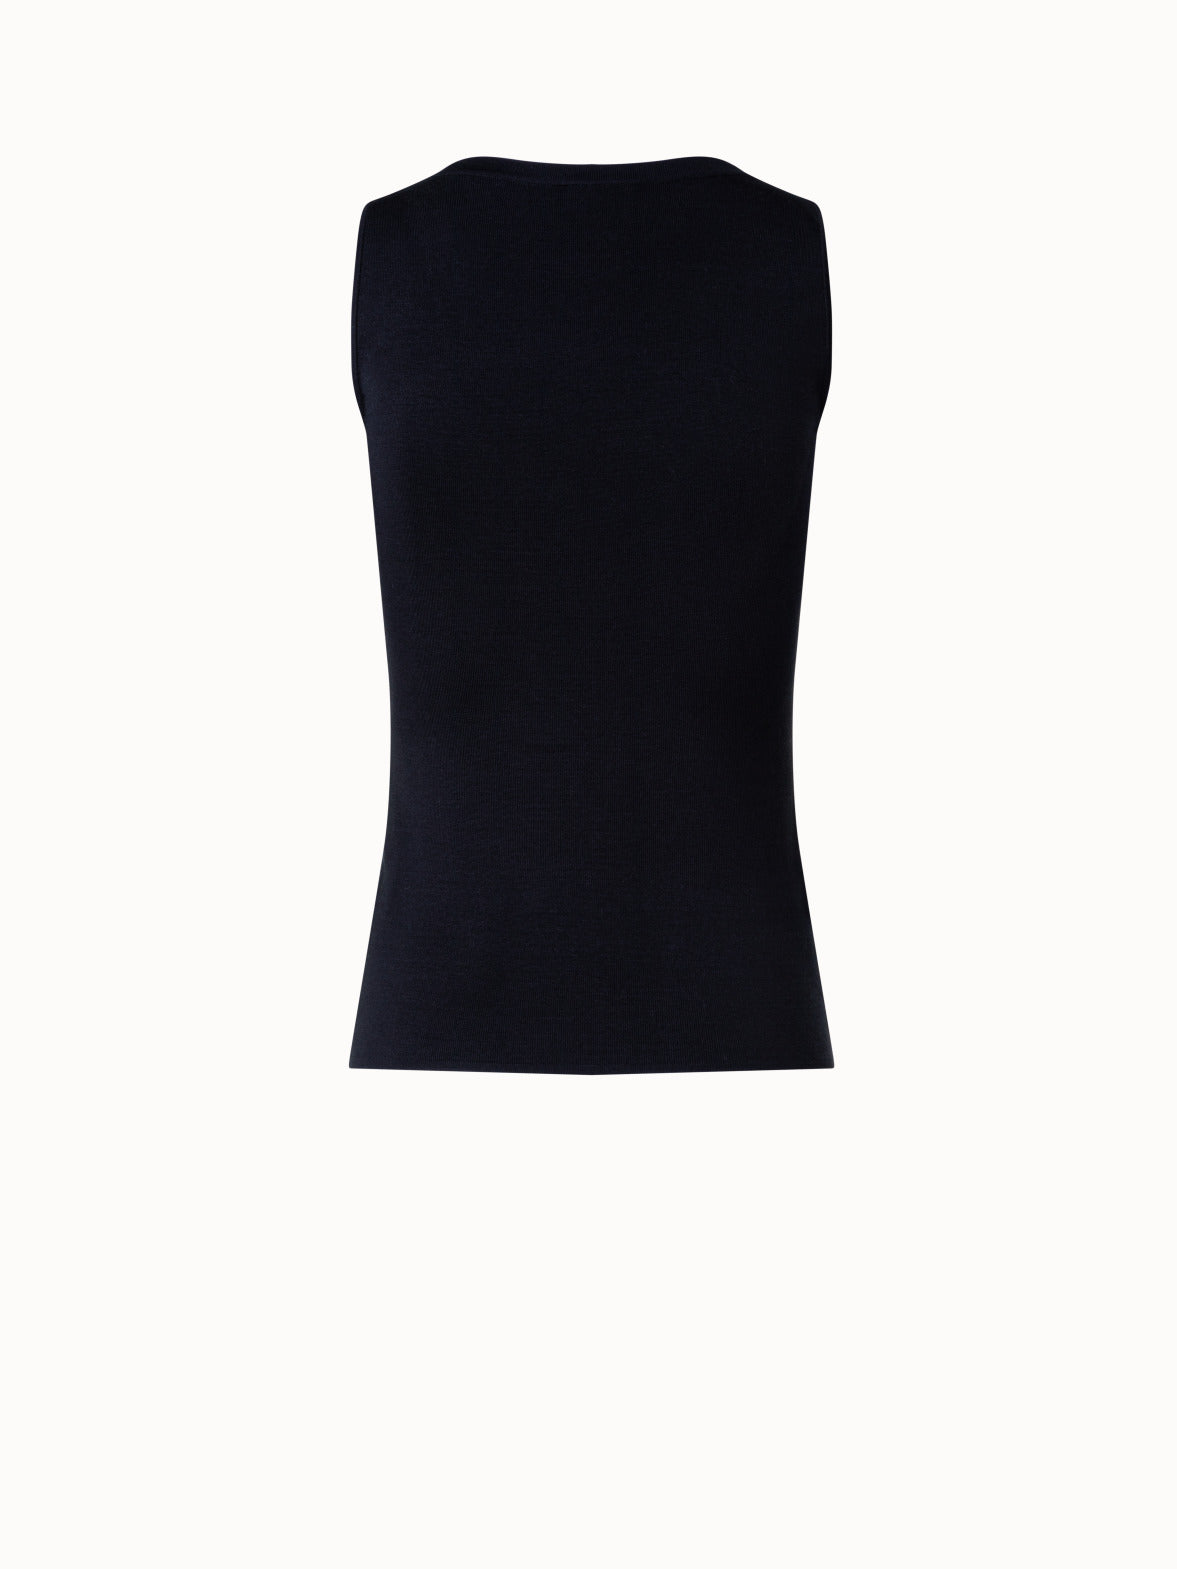 Black Tape Knit Camisole - Scoop Clothing